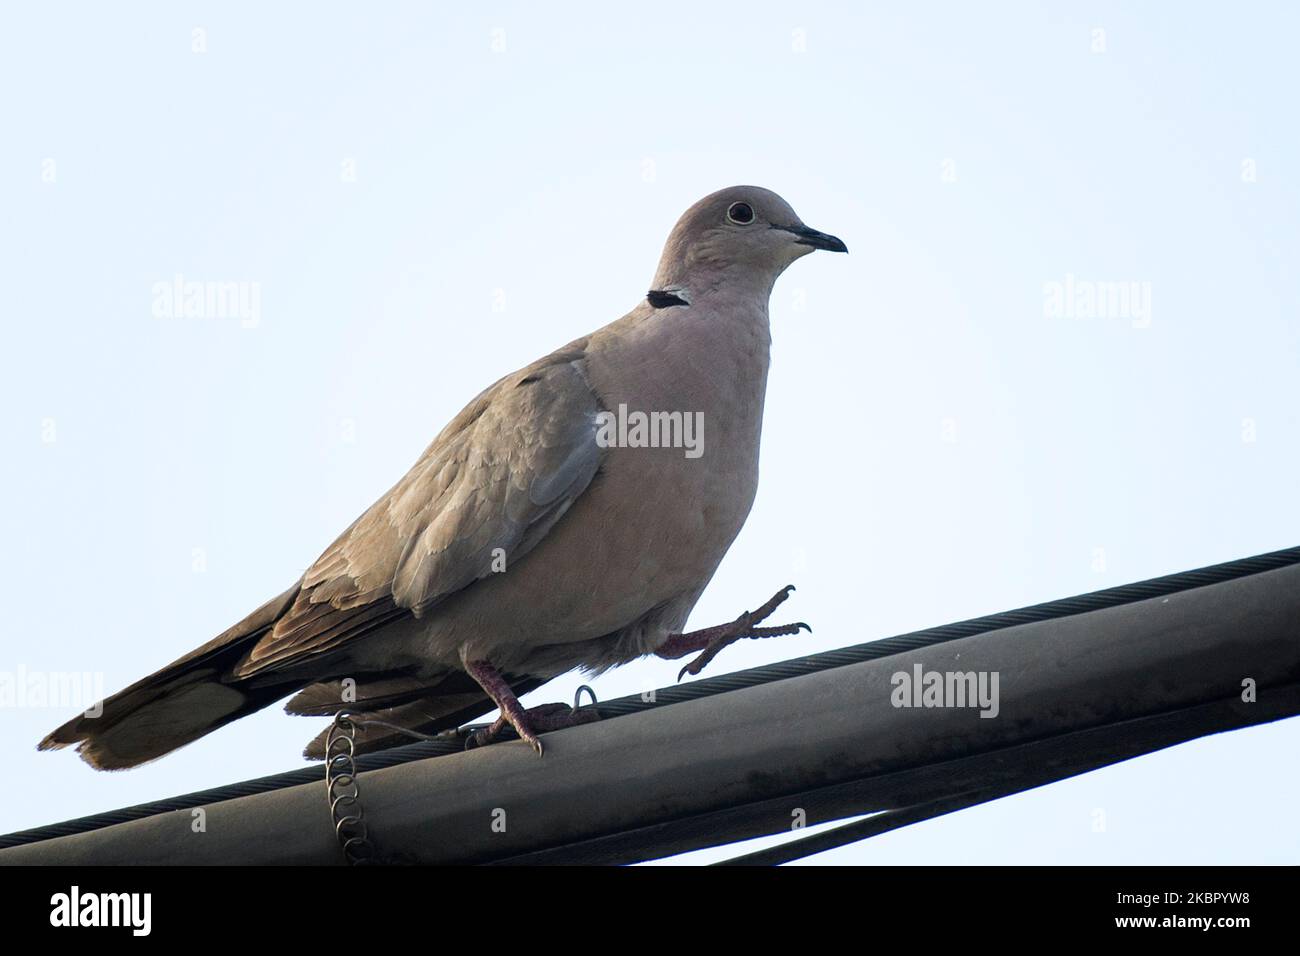 Collared dove also known as oriental dove 'Streptopelia decaocto', southern Italy. Stock Photo